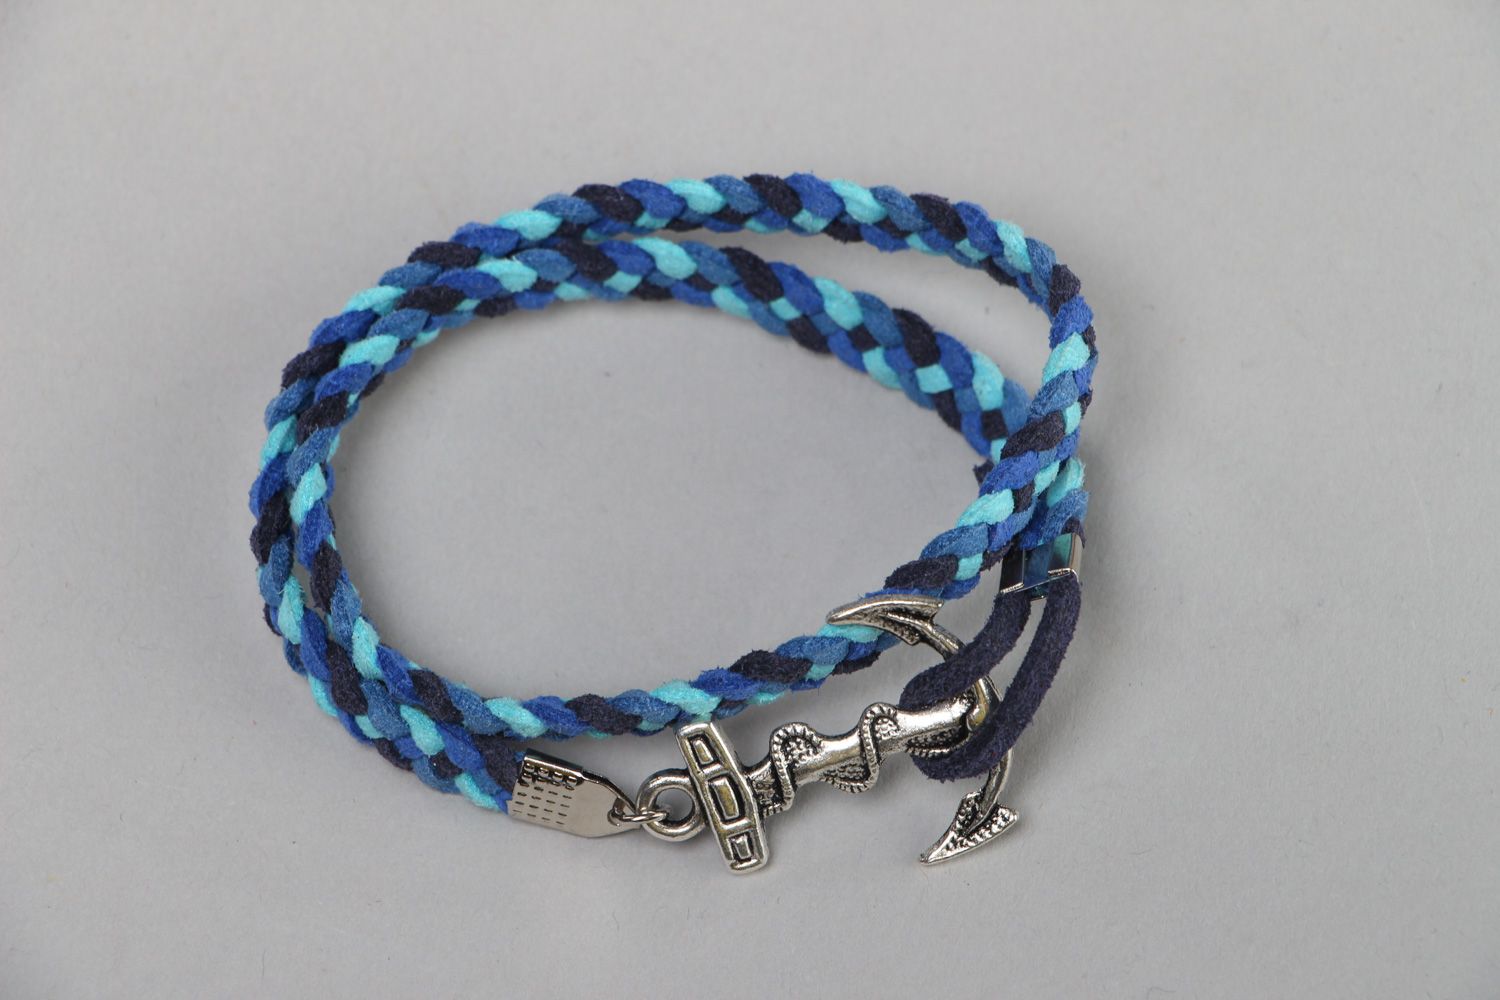 Handmade artificial leather marine charm bracelet in blue and dark blue colors photo 2